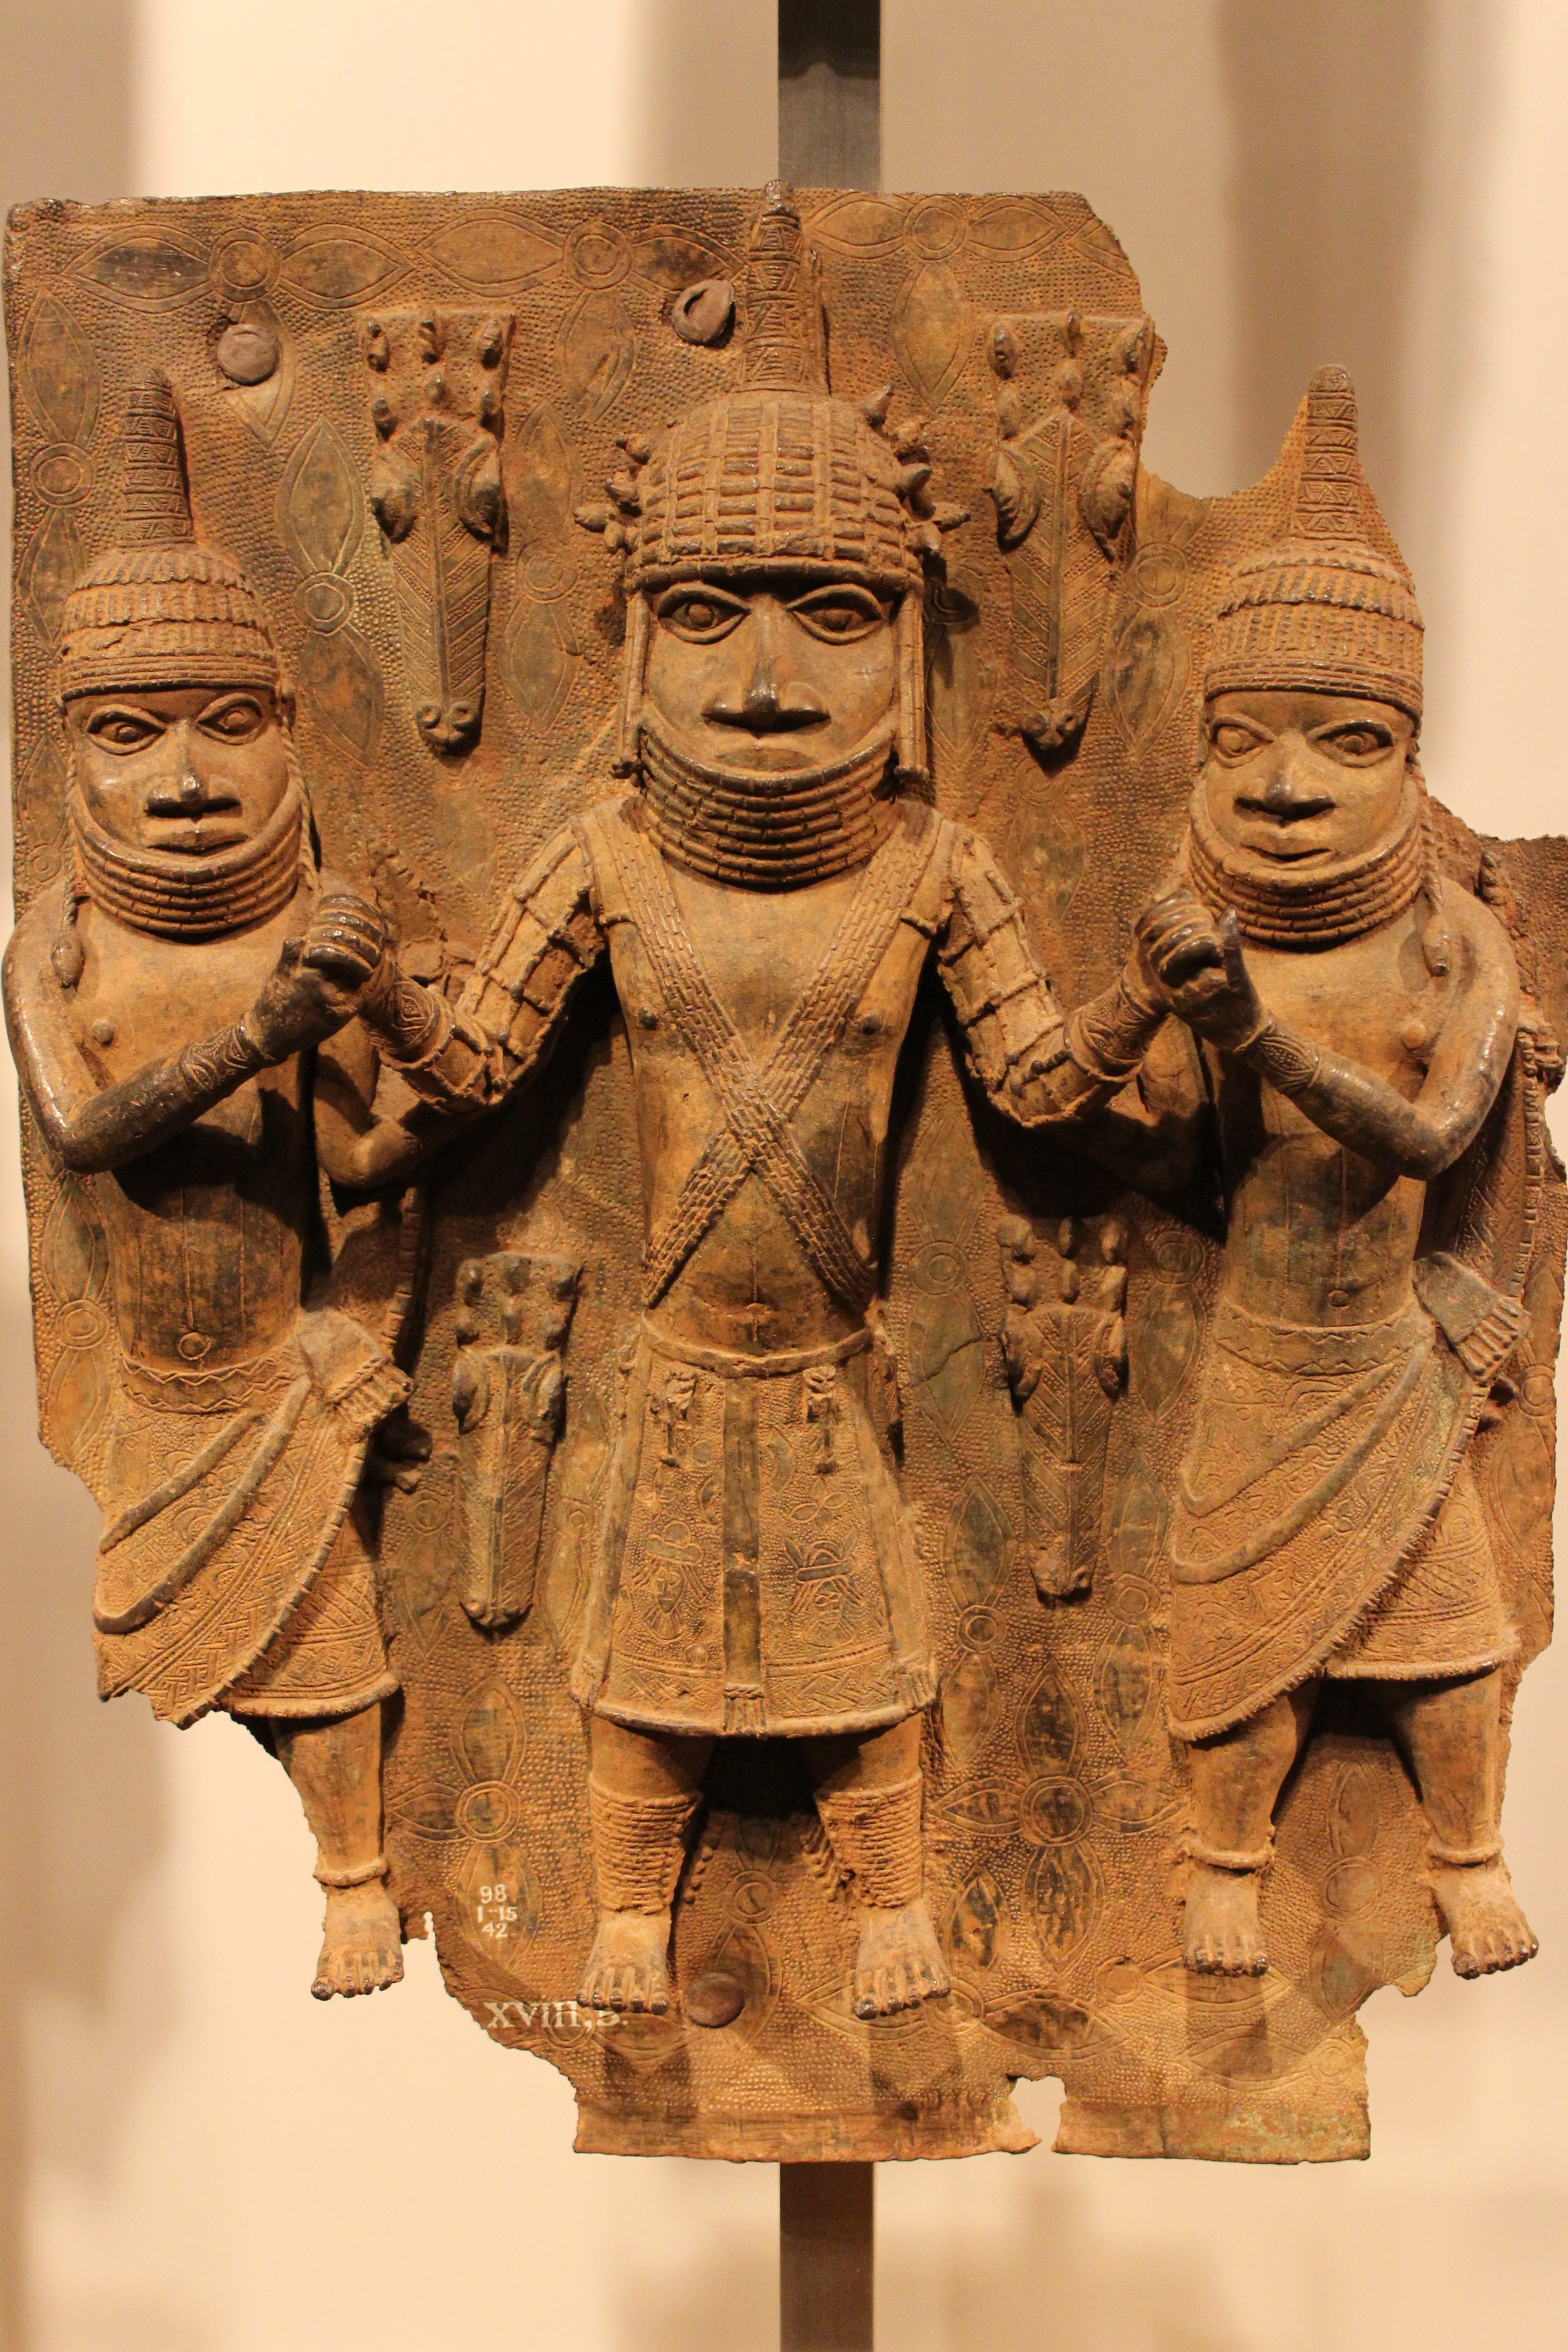 3 stone carved warriors decor